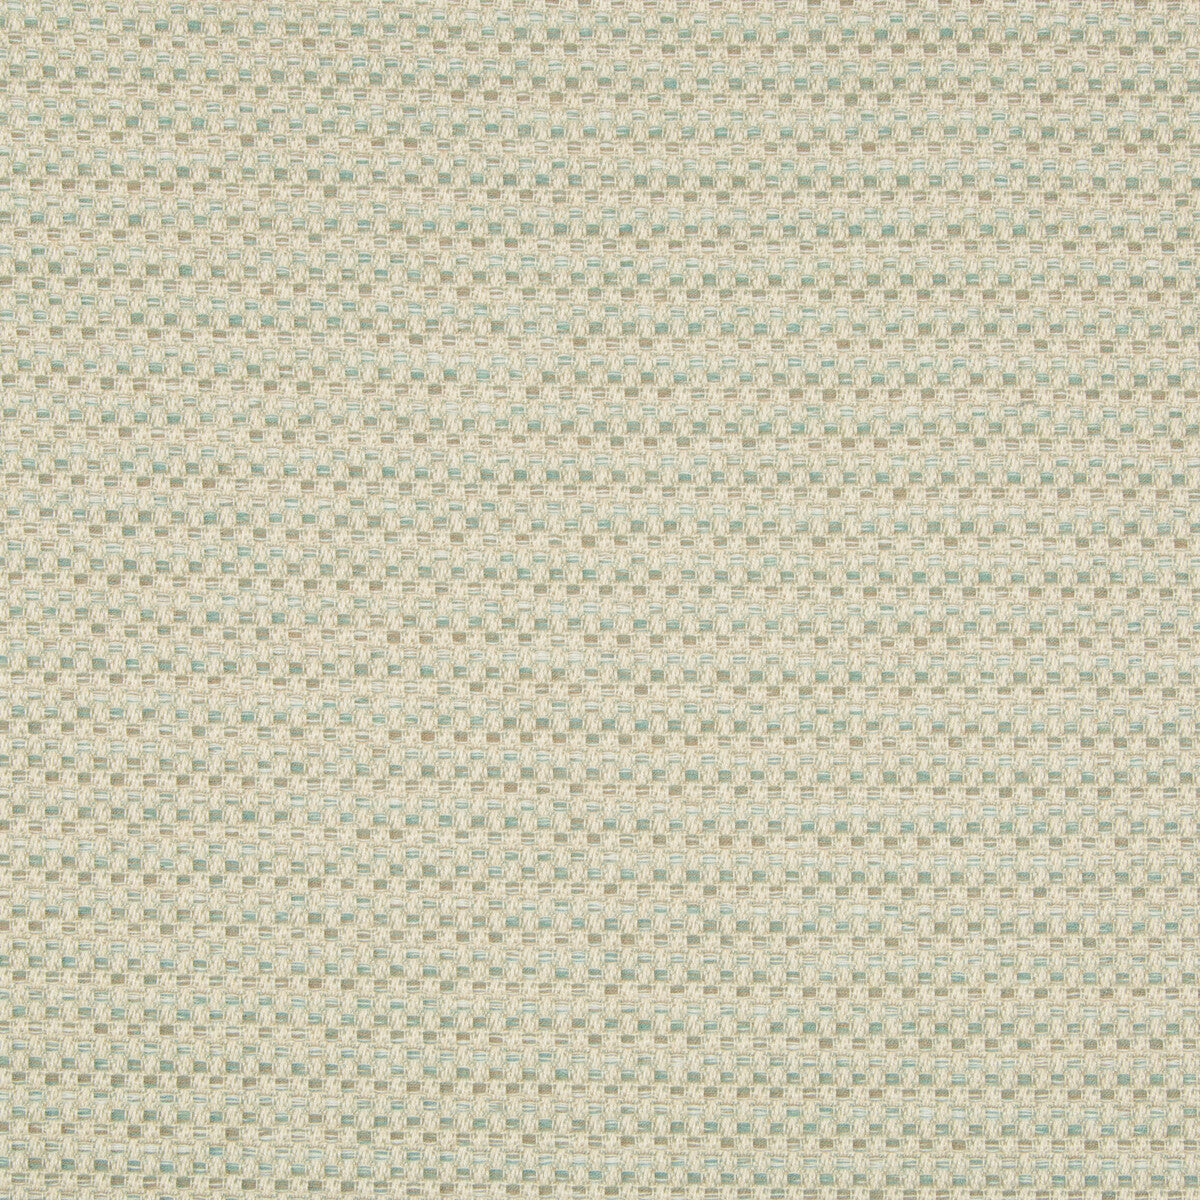 Polo Texture fabric in seaspray color - pattern 31938.1623.0 - by Kravet Design in the Oceania Indoor Outdoor collection